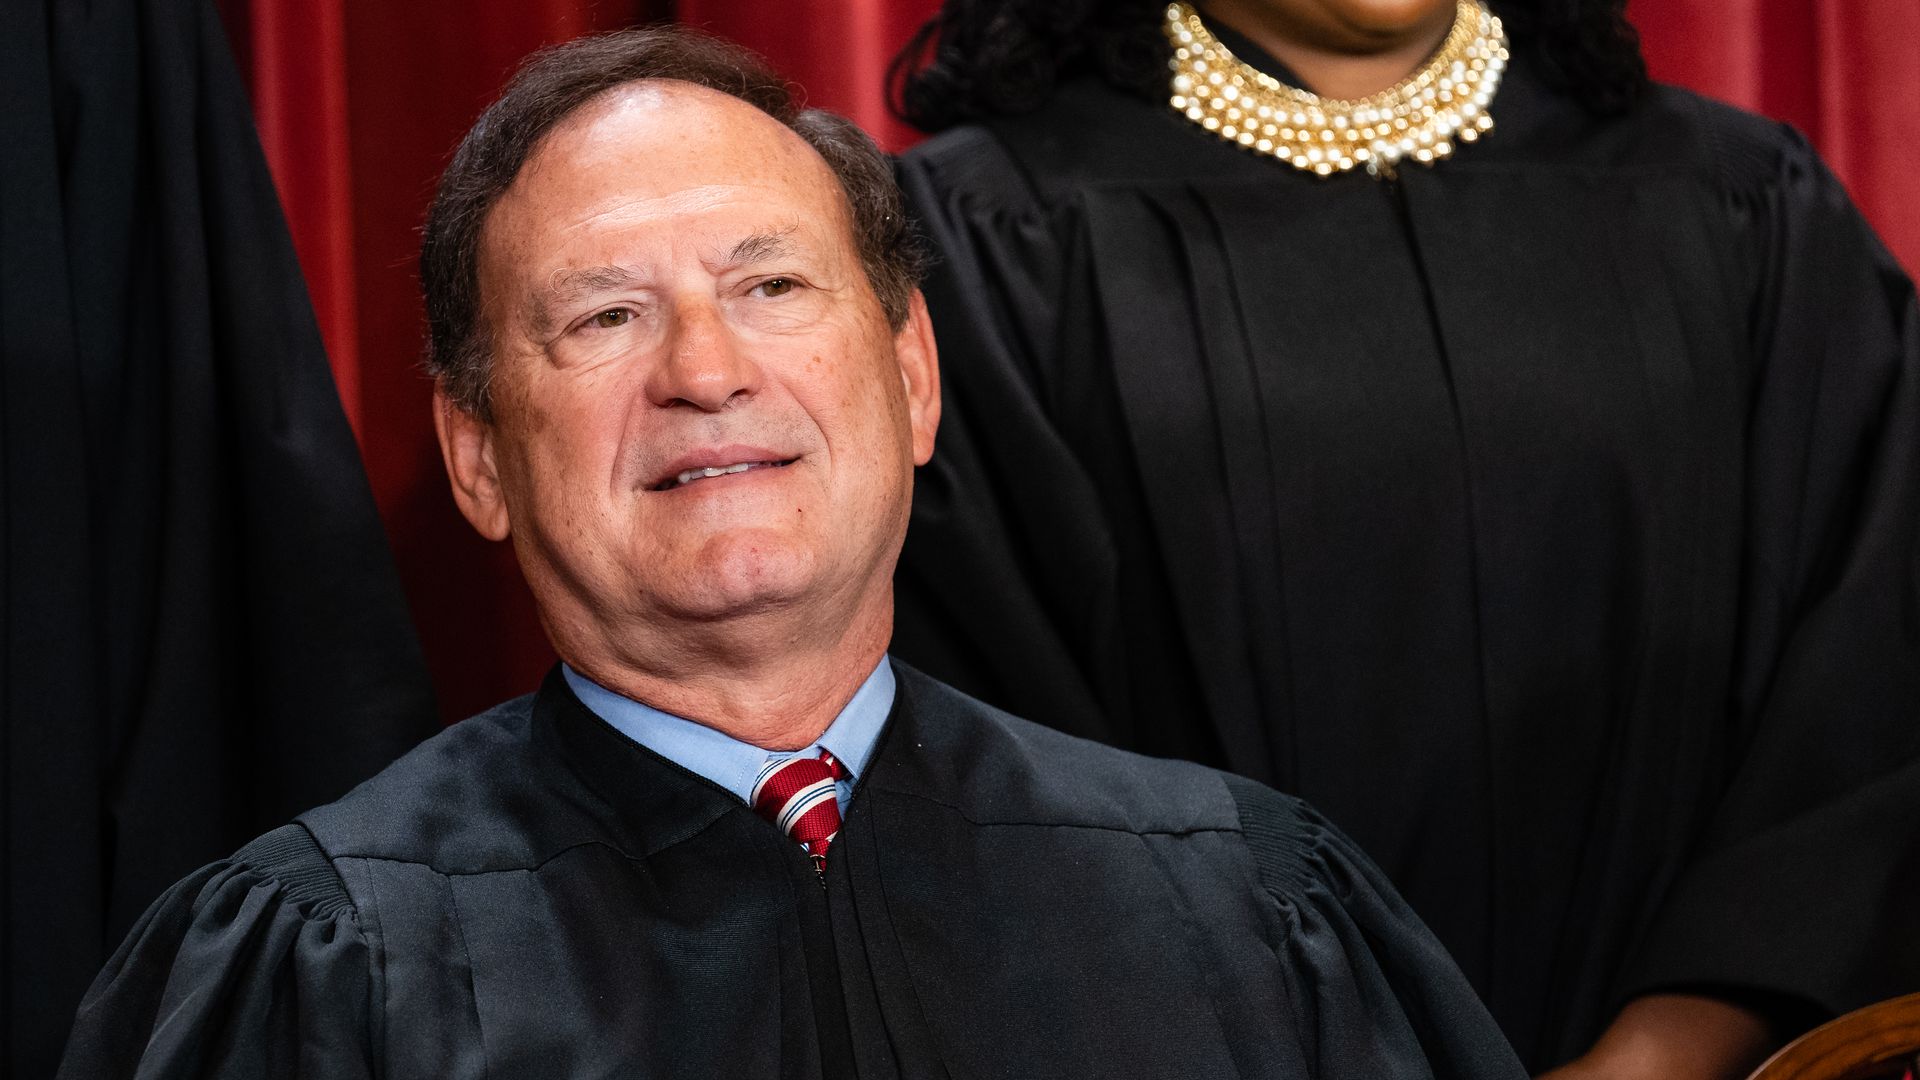 Justice Samuel Alito, wearing black robes, a blue shirt and red tie, surrounded by colleagues.